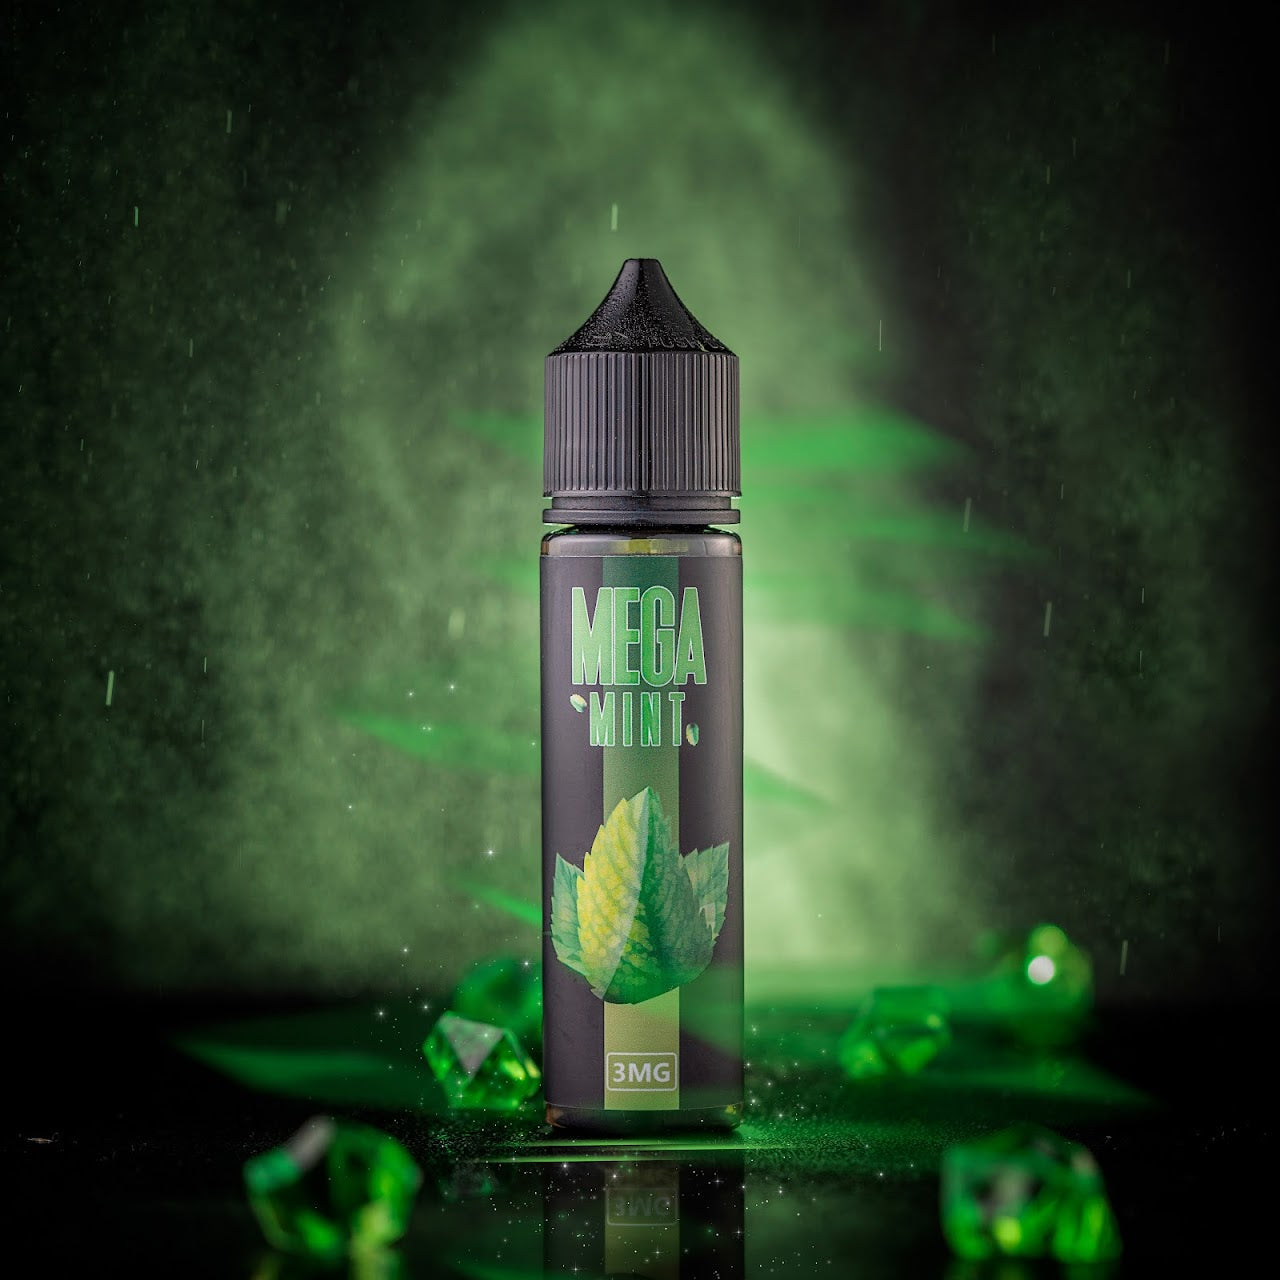 Mega Mint by GRAND - A refreshing blend of authentic mint flavors in e-liquid form for an invigorating vaping experience.